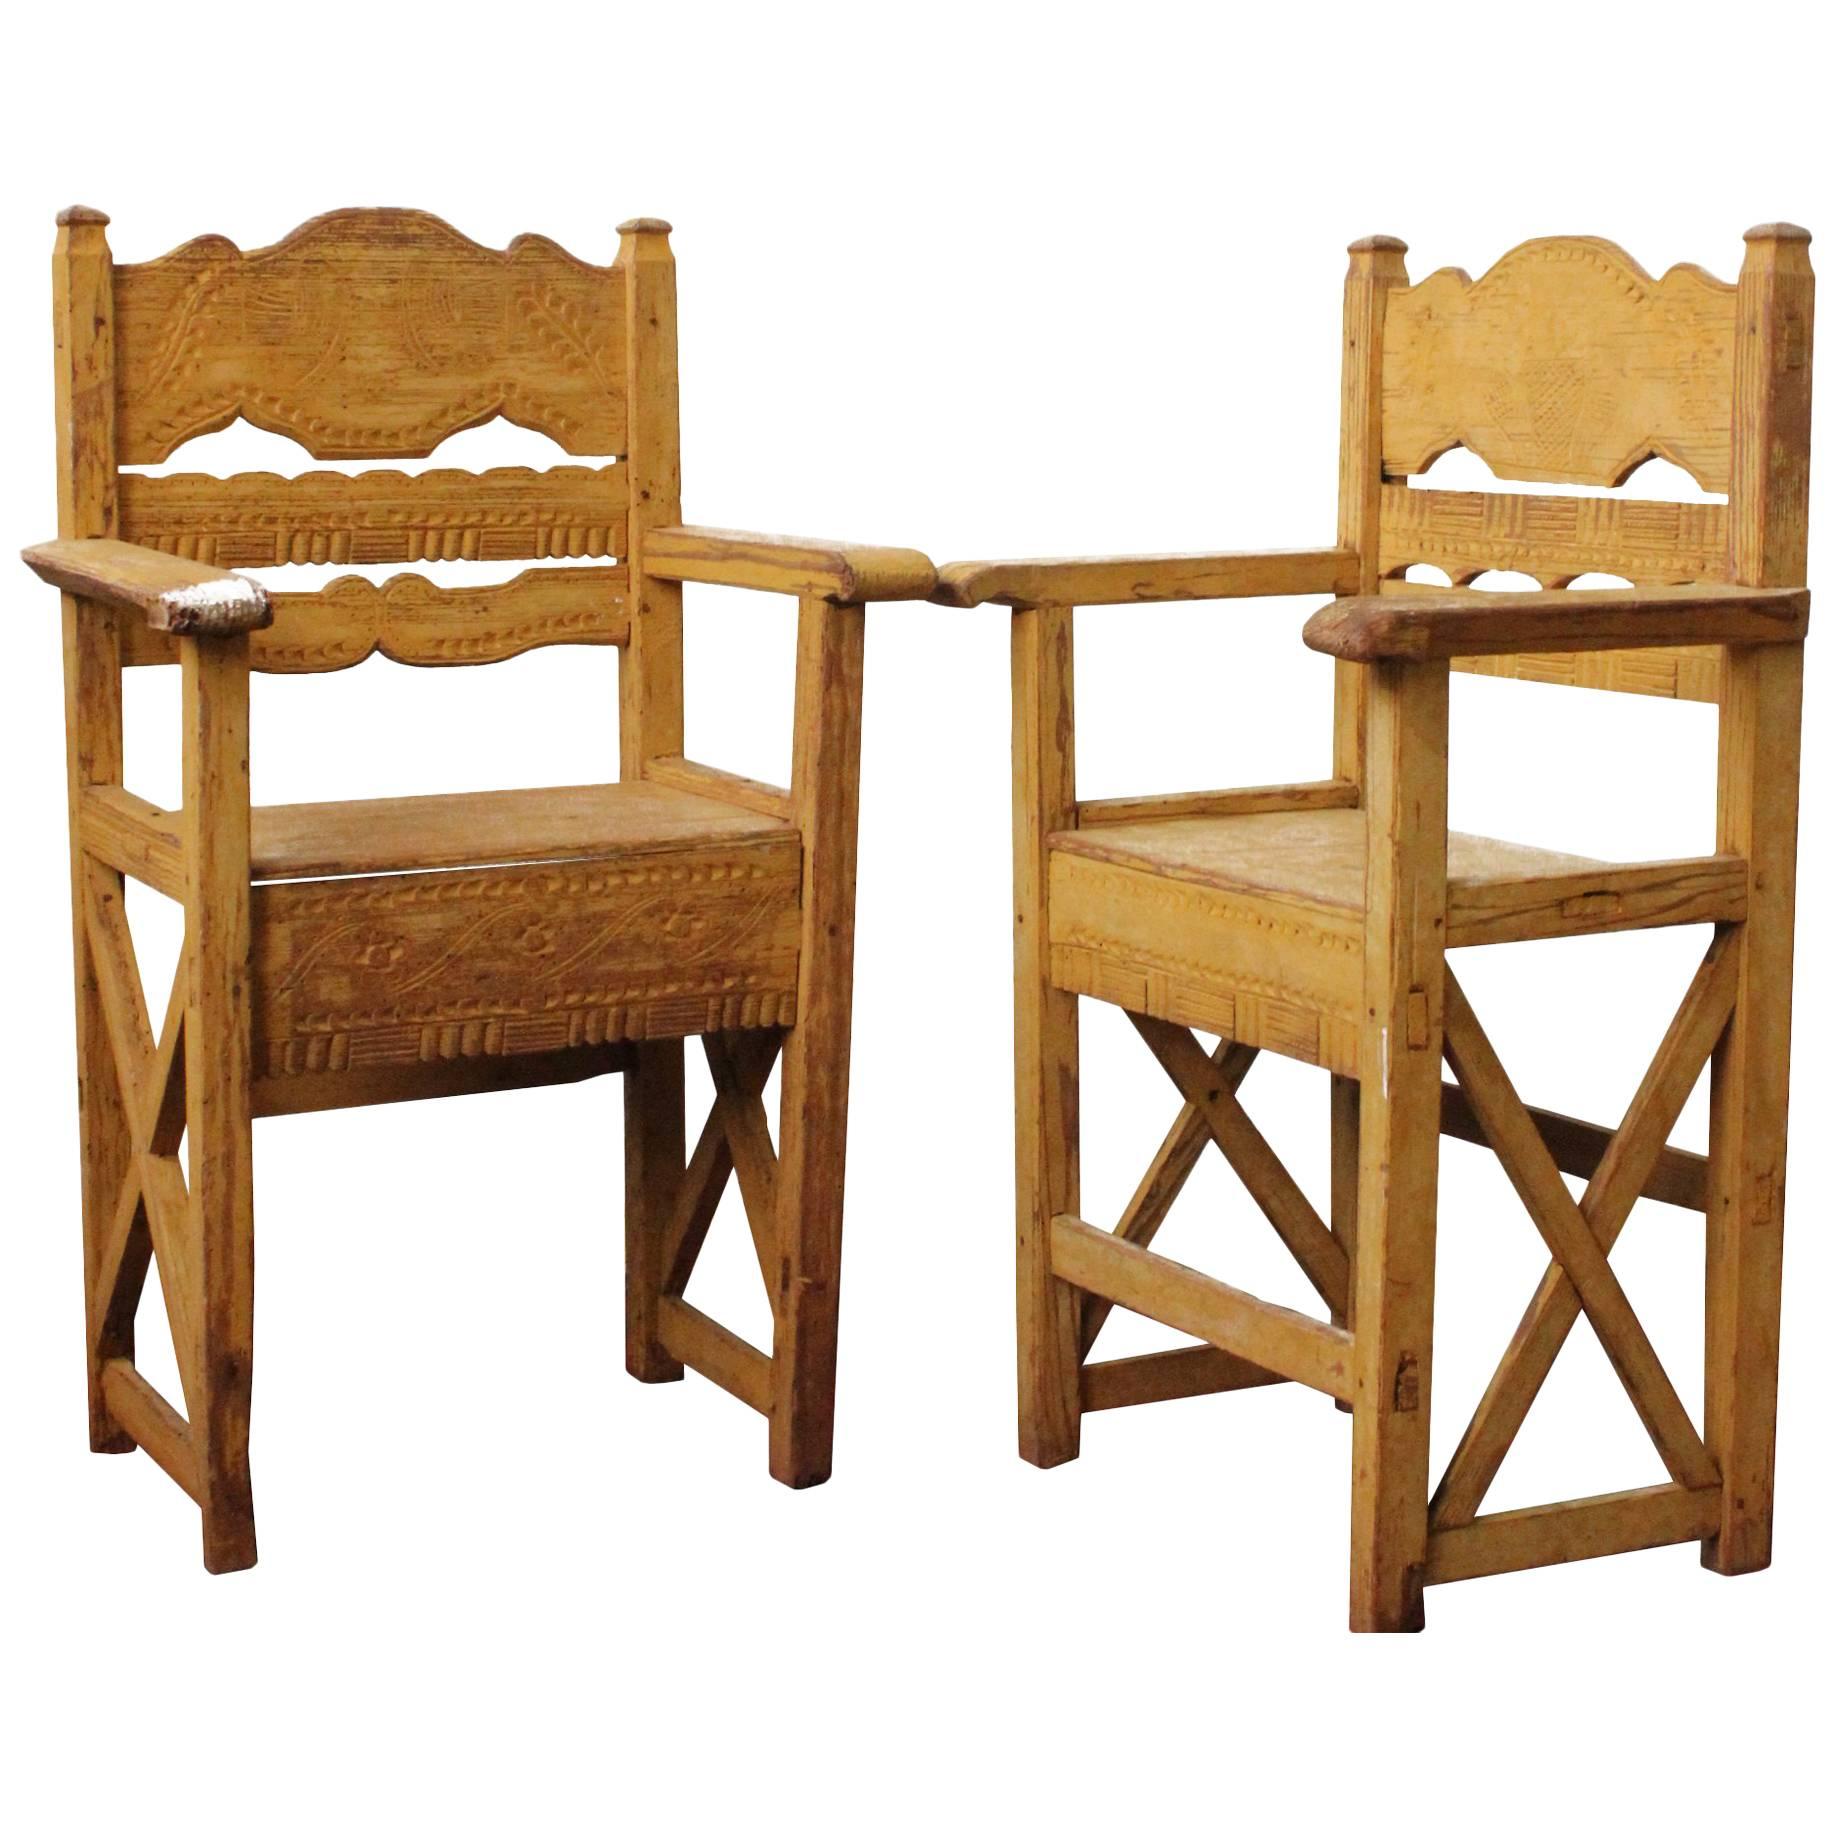 Late 19th Century Set of Chairs Found in Western Mexico